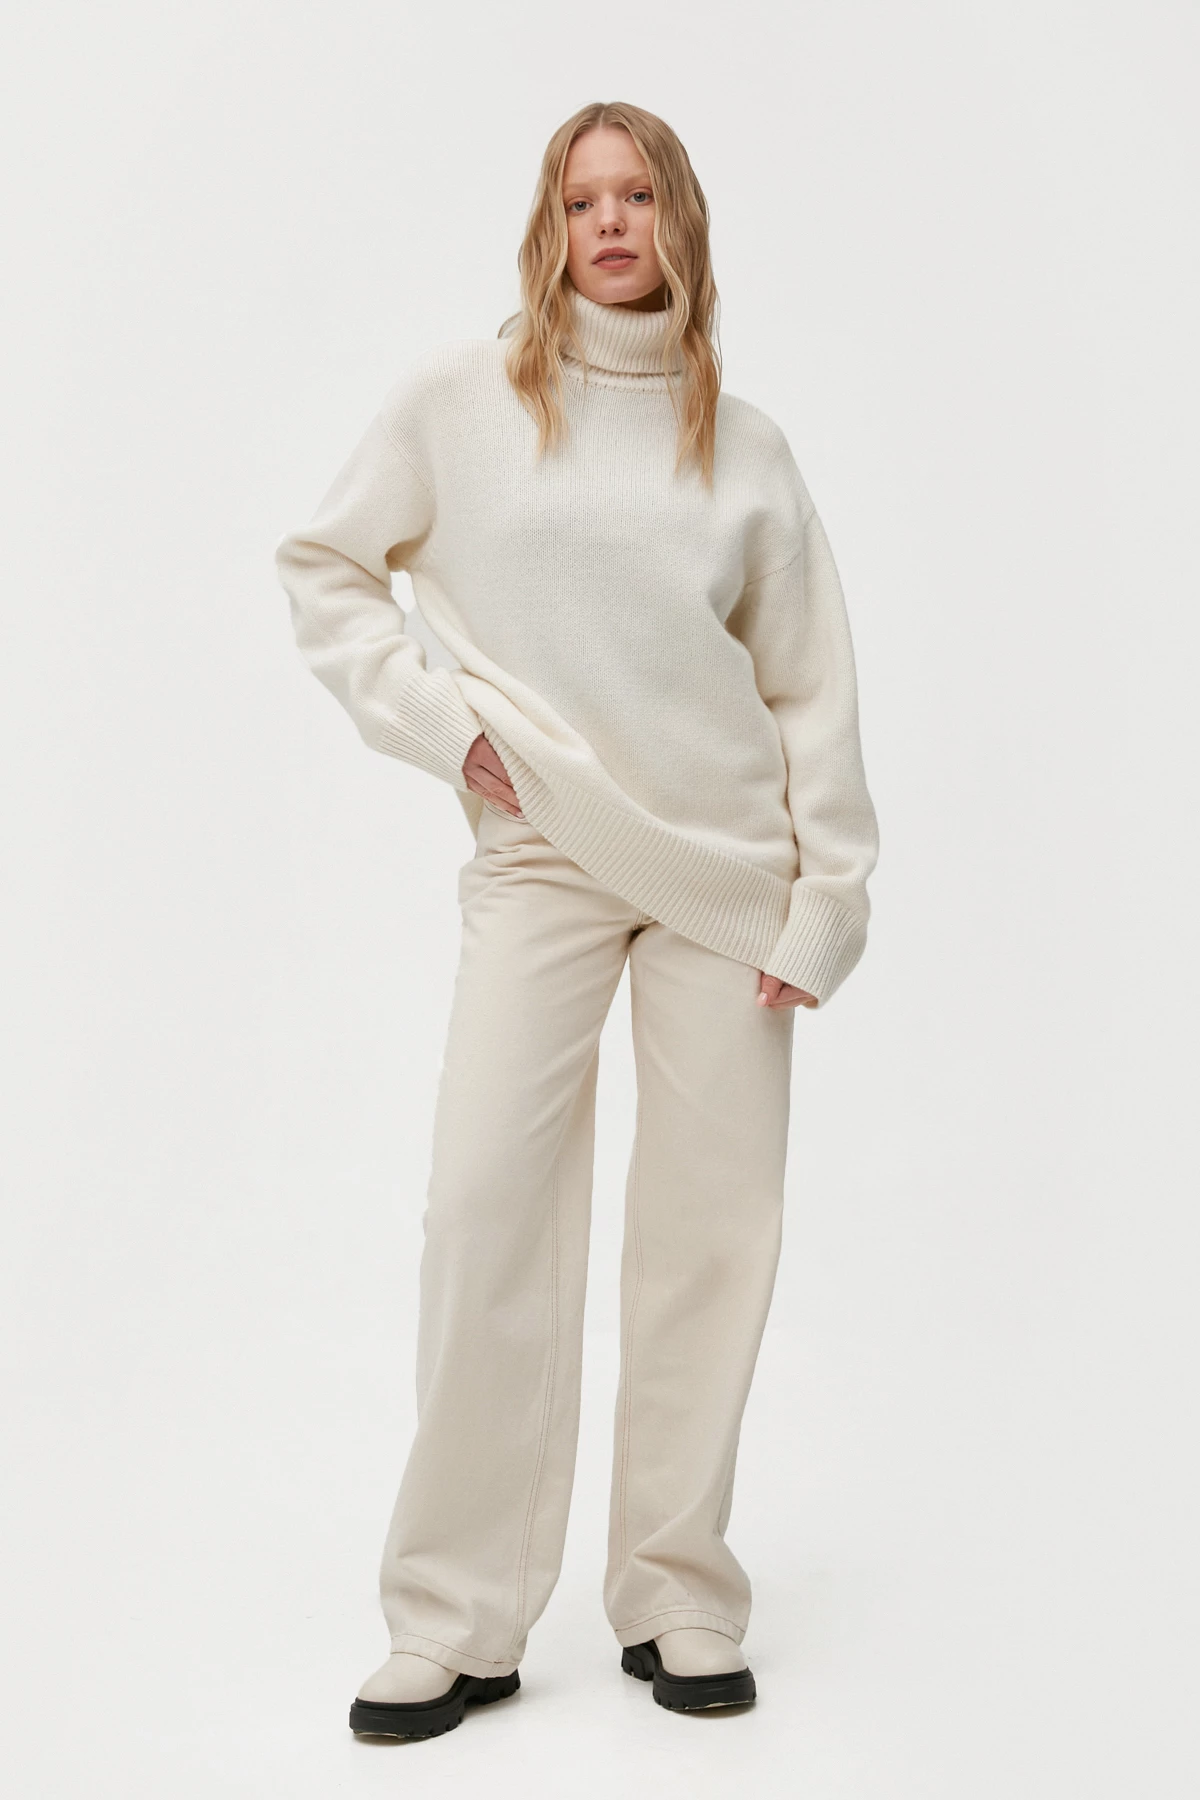 Cashmere milky high neck loose-fit sweater, photo 3